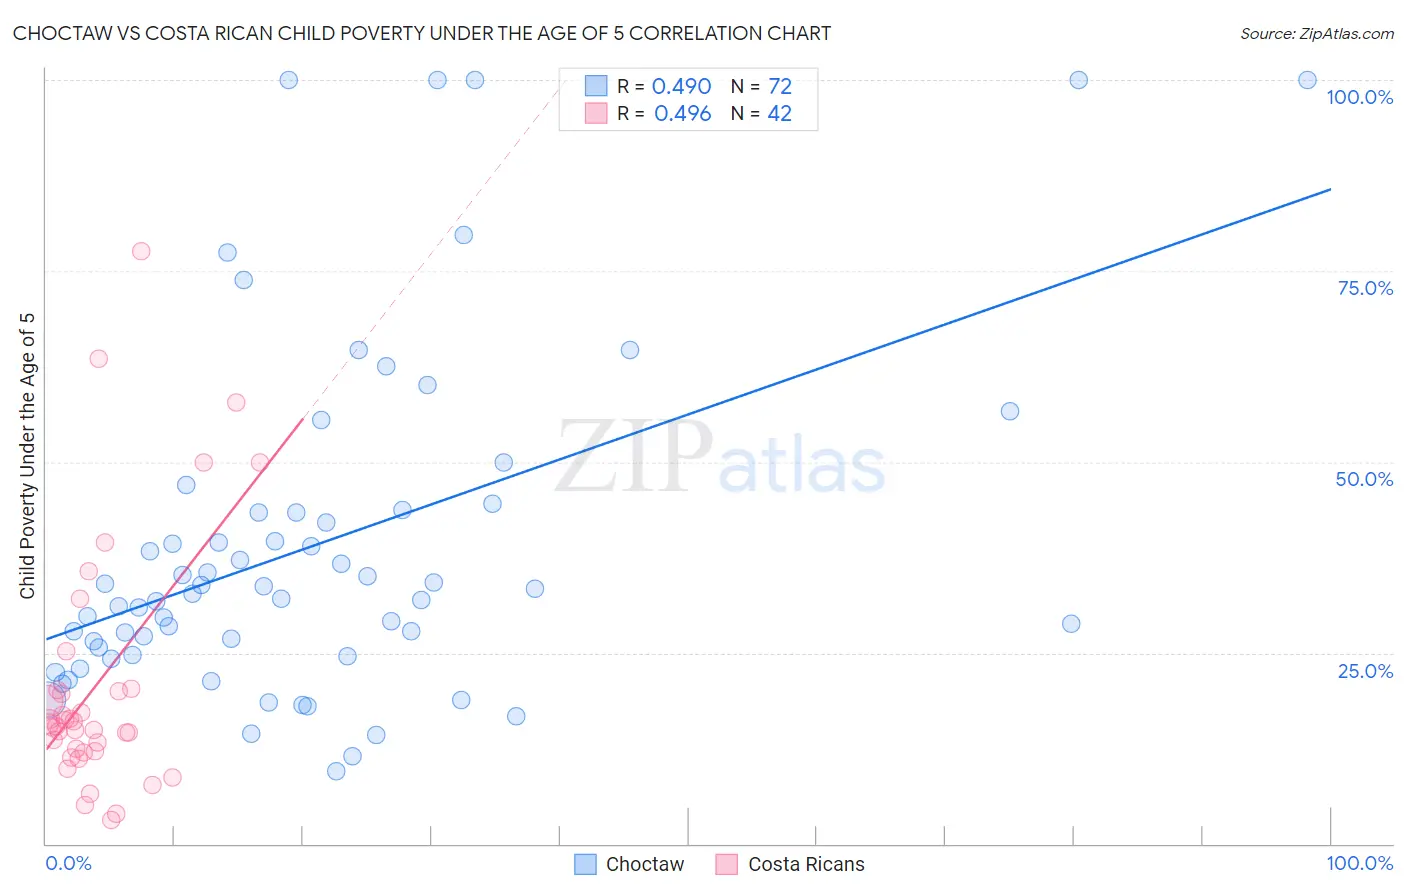 Choctaw vs Costa Rican Child Poverty Under the Age of 5